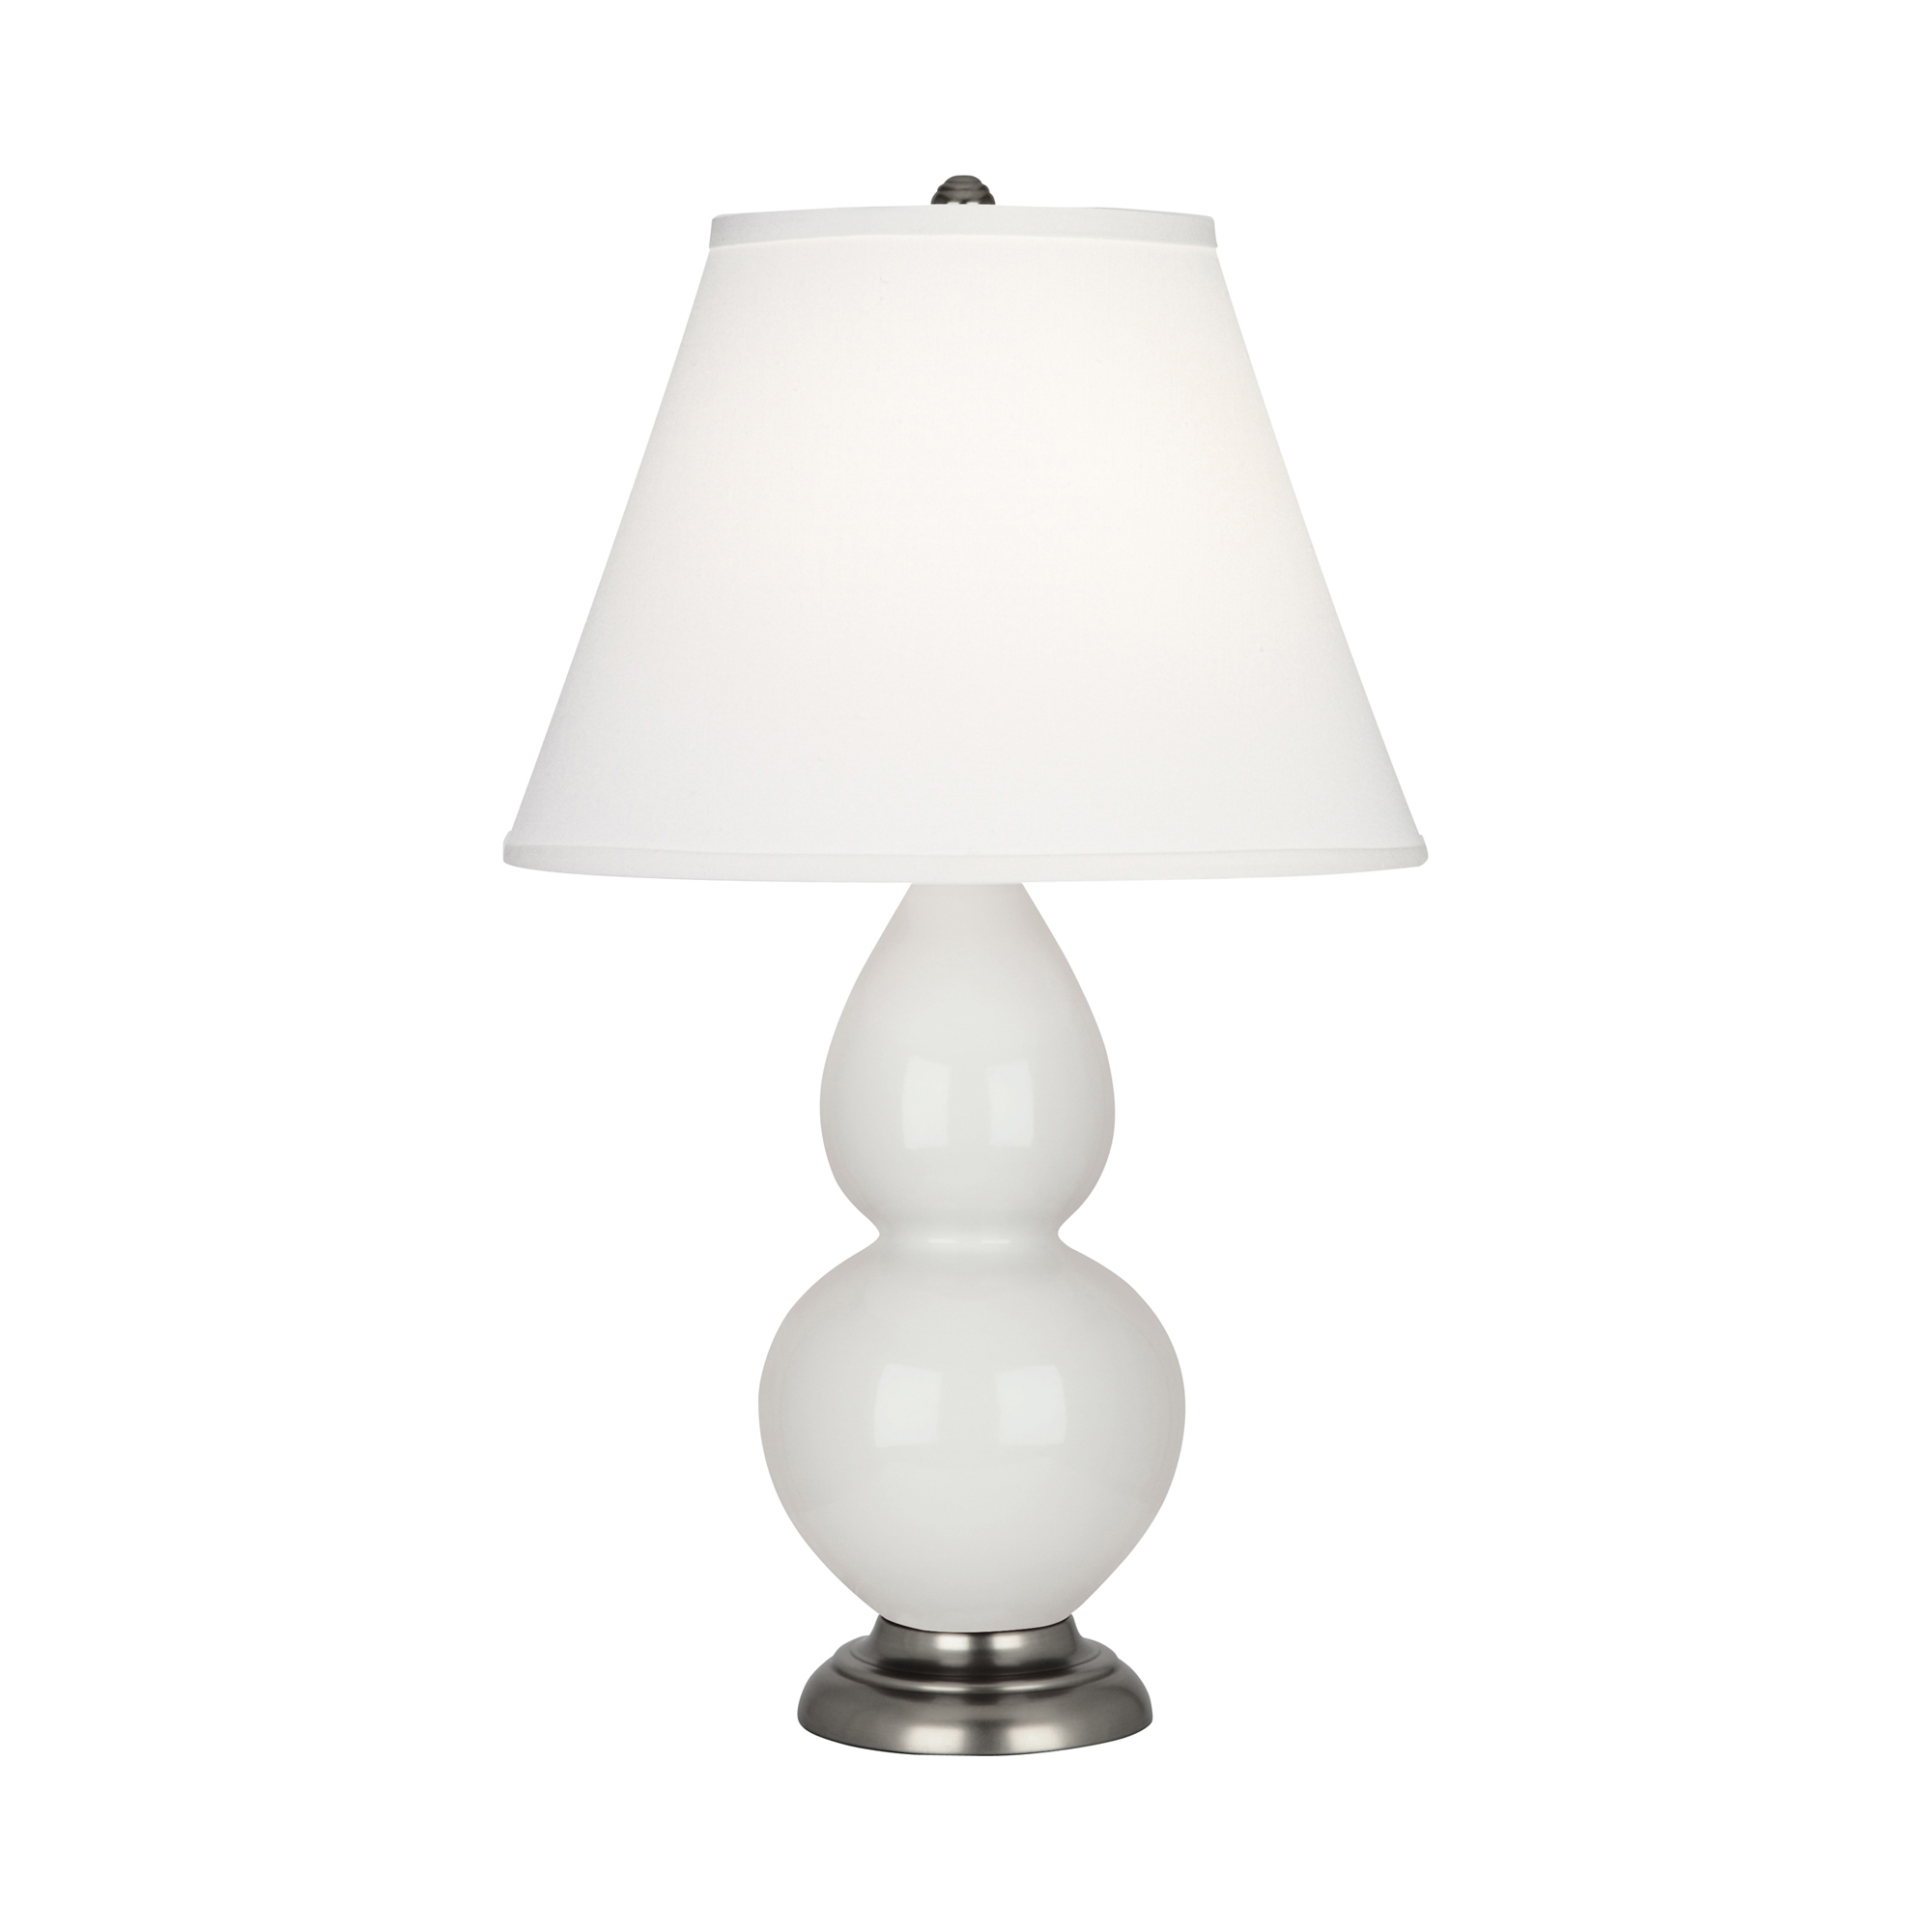 Small Double Gourd Accent Lamp Style #1690X